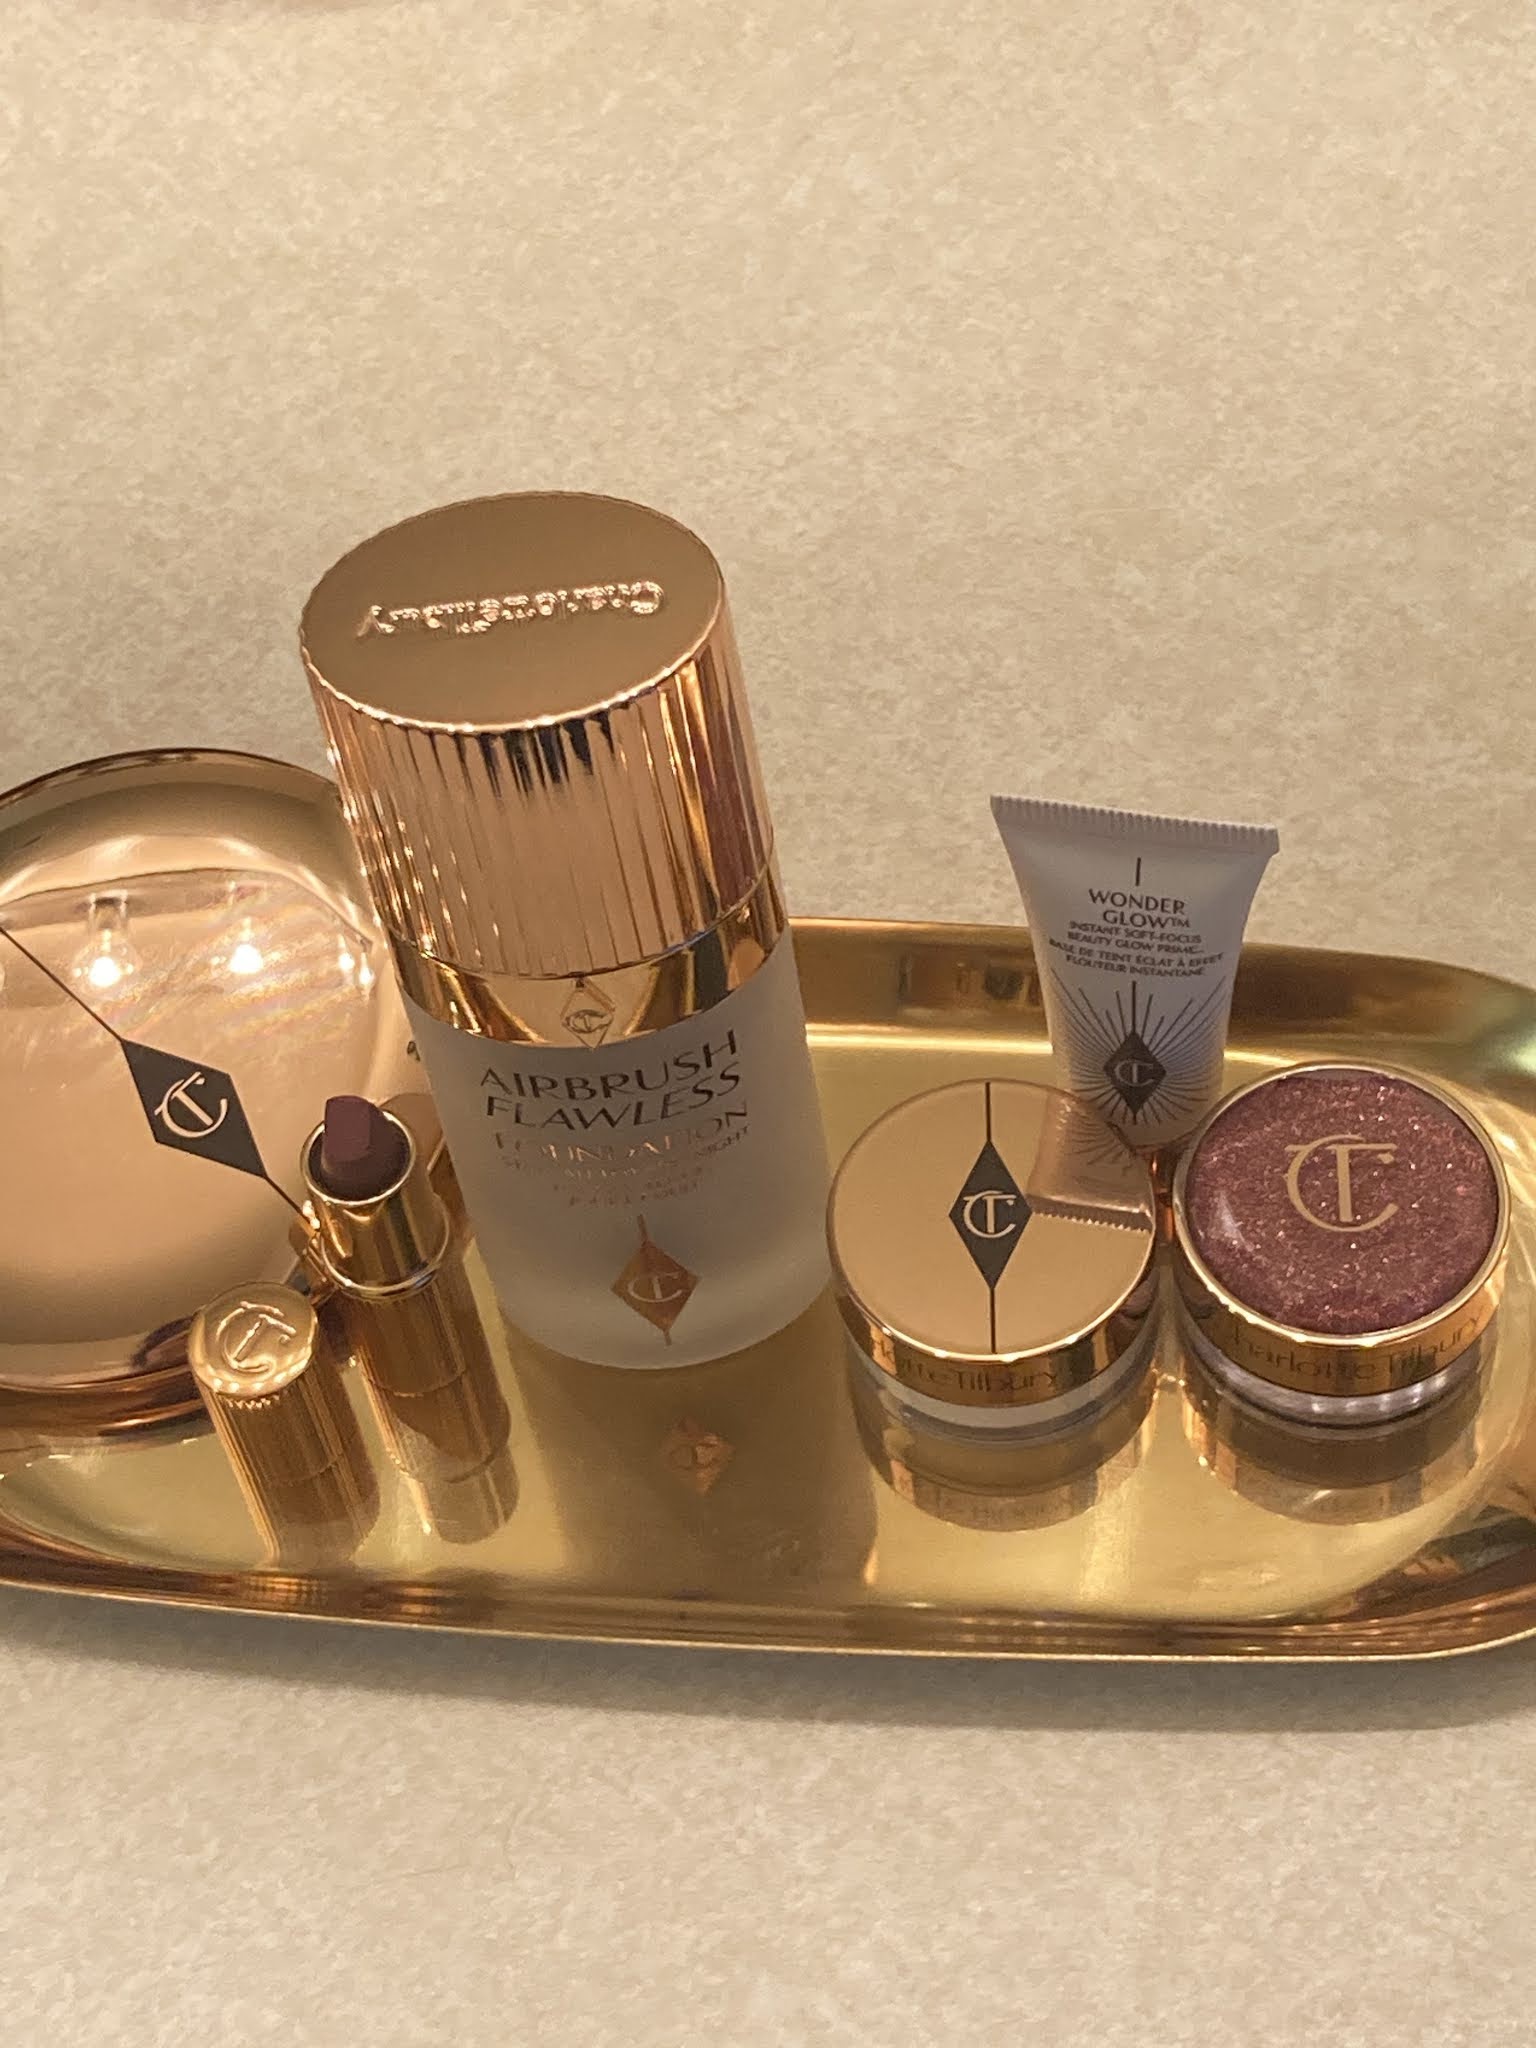 Charlotte Tilbury Airbrush Flawless Foundation Review + Wear Test []